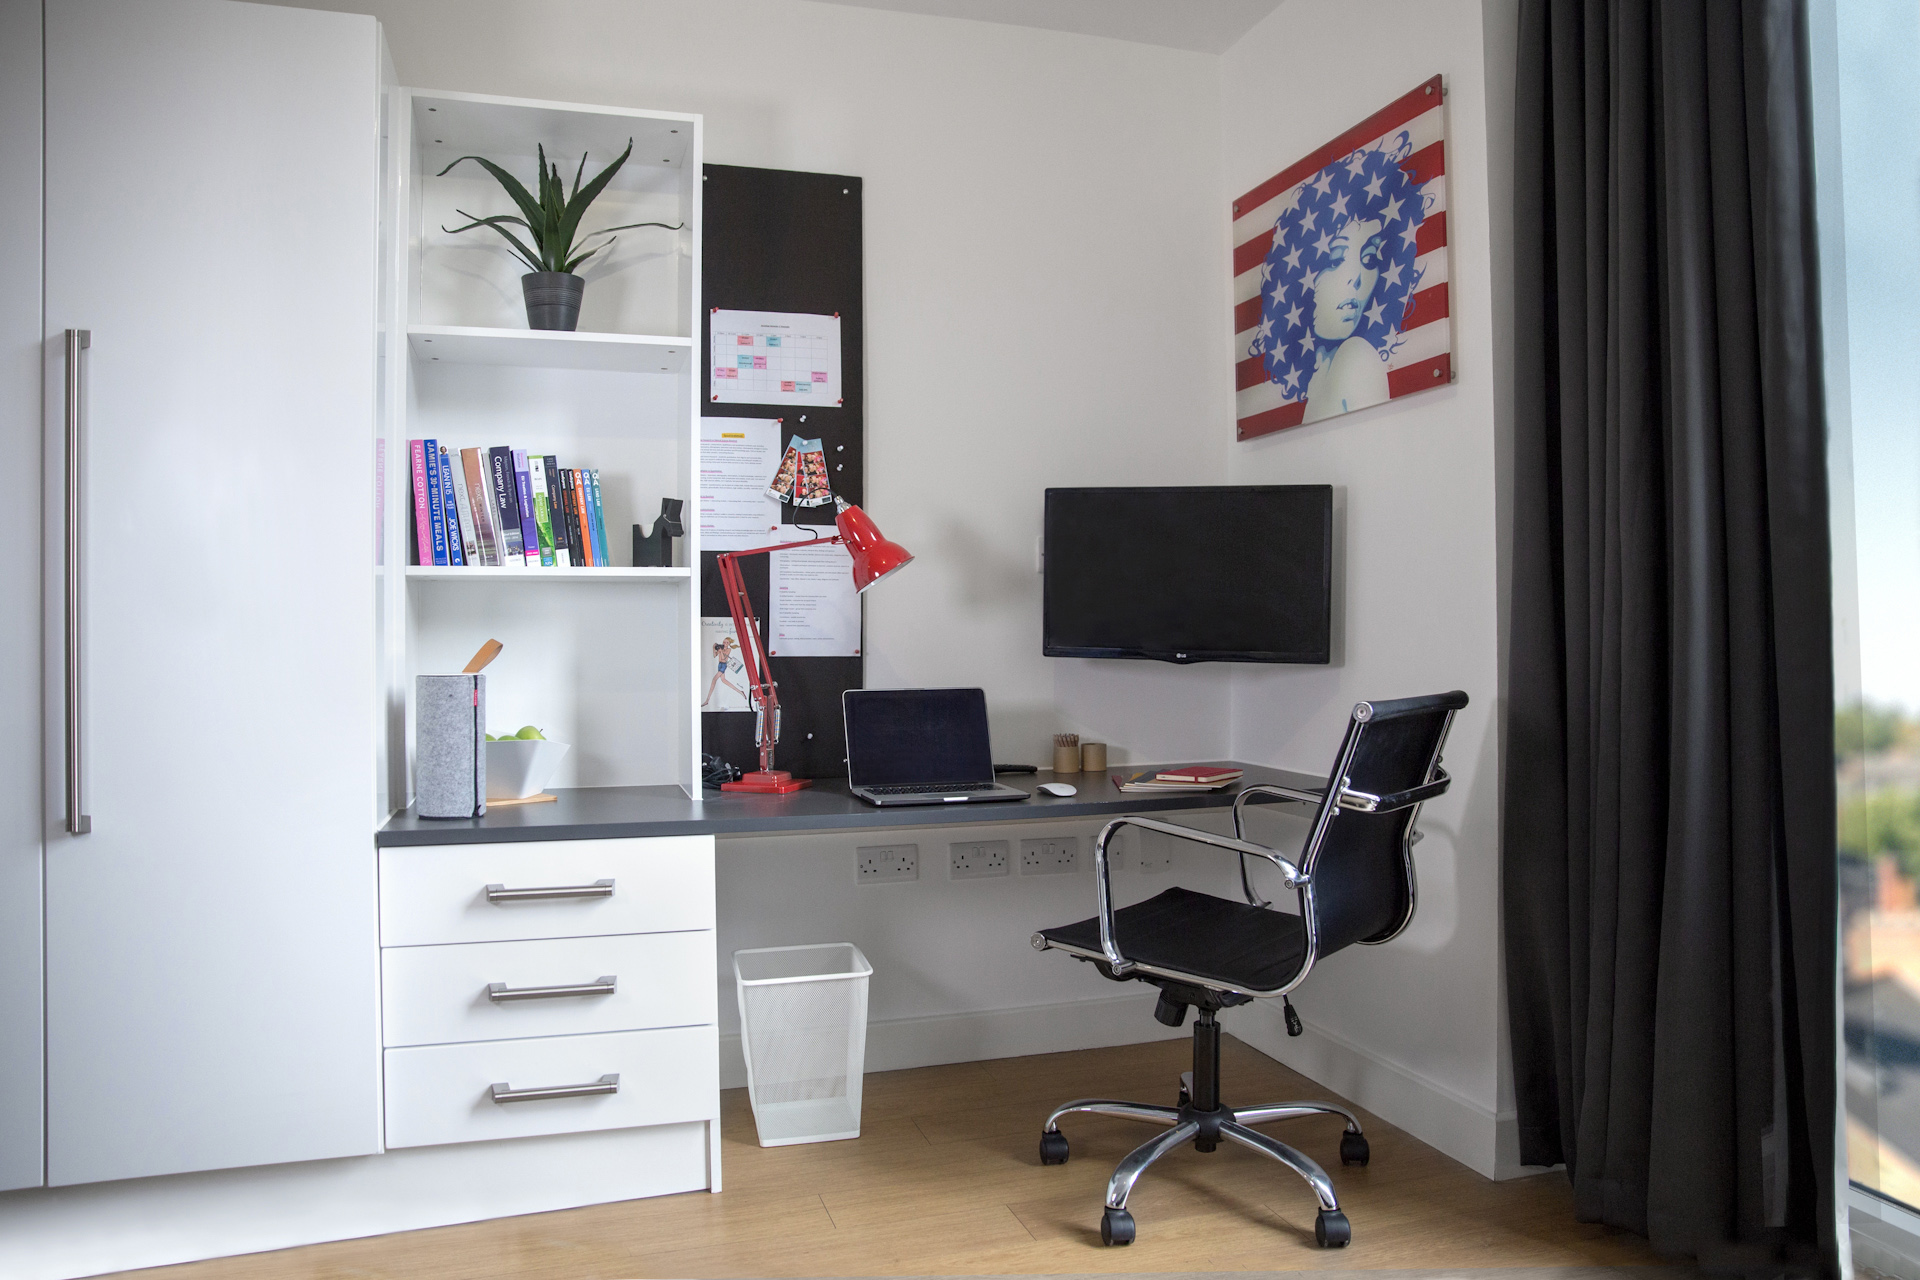 Personal Workspace at CODE Student Accommodation Leicester